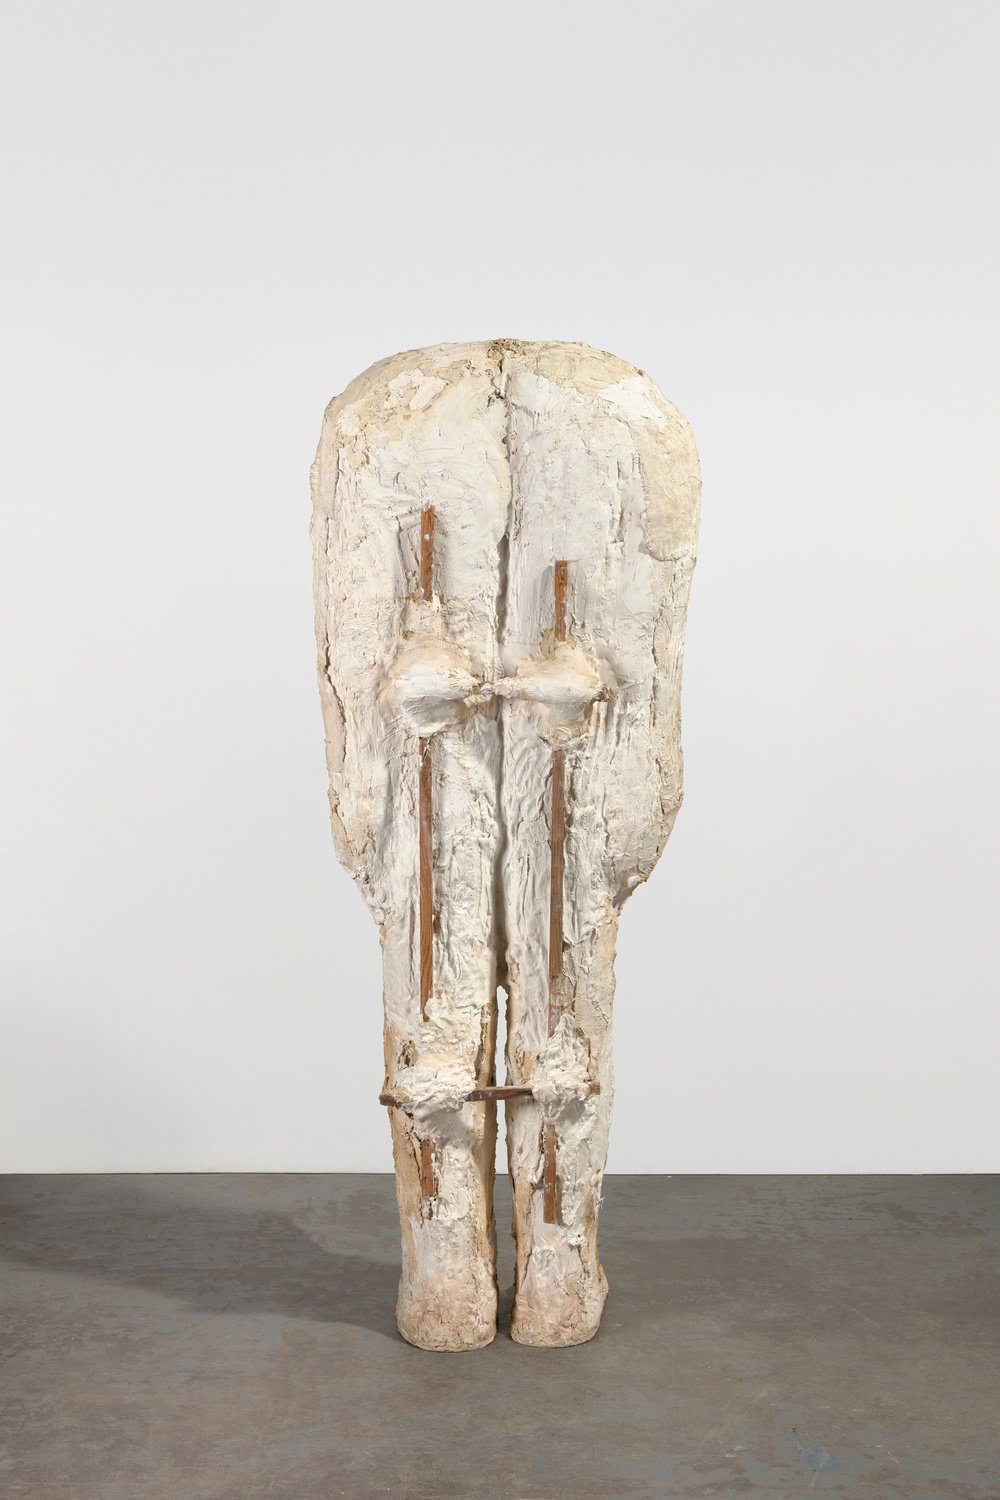 Abakanowicz, plaster body 2 (view 1), 1987, plaster and wood, 70 x 27 x 16 in., 177.8 x 68.6 x 40.6 cm, non 49.965 lance brewer